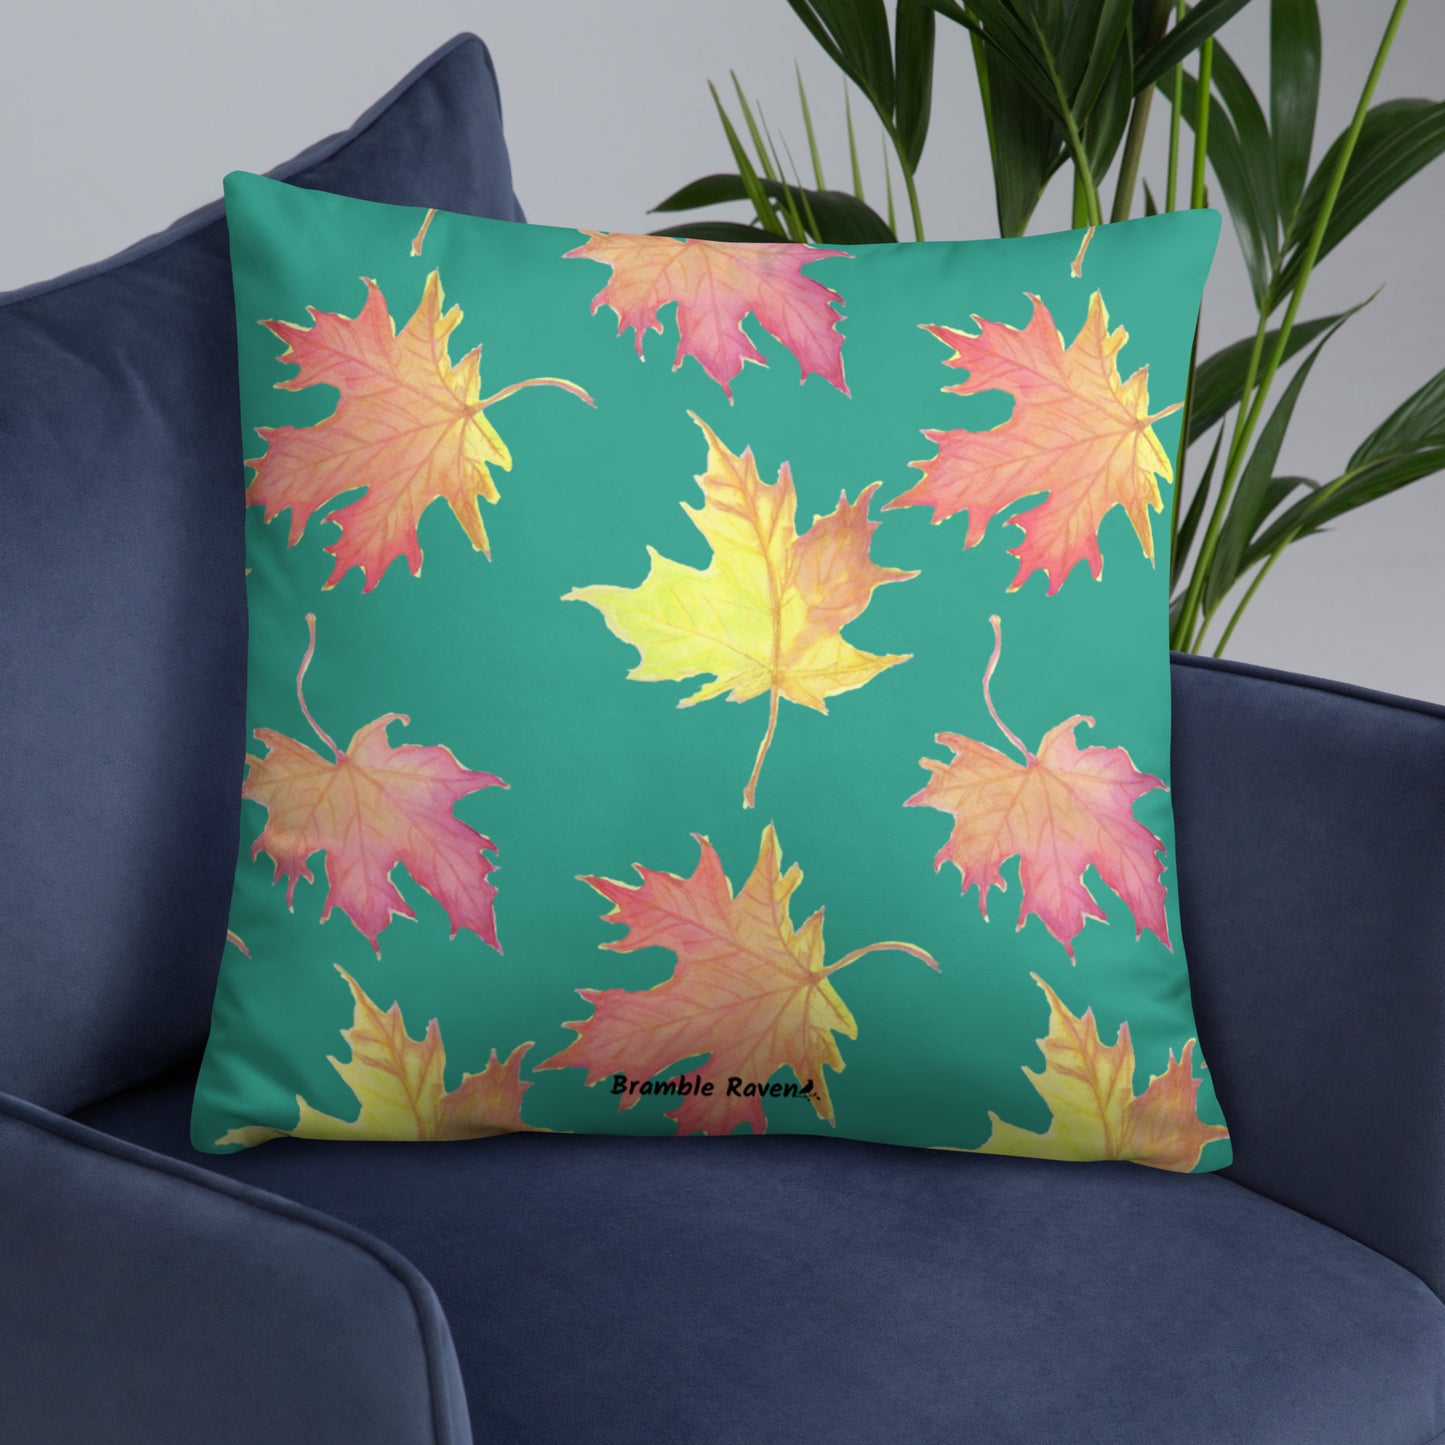 22 by 22 inch accent pillow featuring watercolor fall leaves on a dark green background. Pillow is double-sided. Larger patterned leaves on the back. Smaller patterned leaves on the front. Shown on a blue sofa.